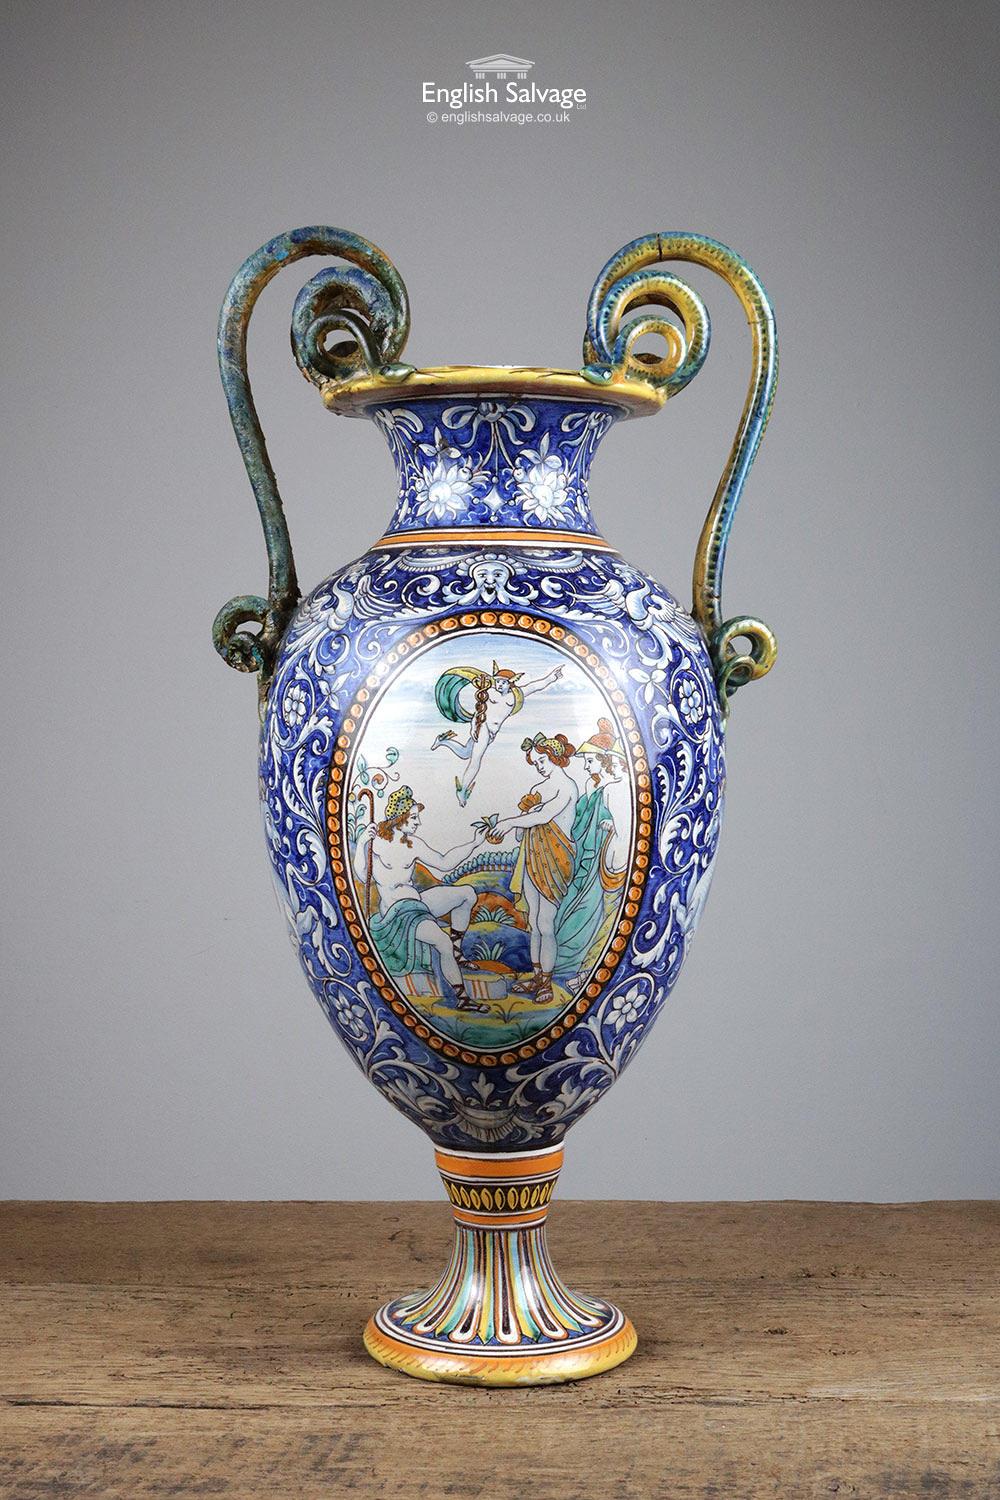 Classical hand painted Majolica vase in the style of the 19th century. Cantagalli. On the front Hermes or Mercury the messenger God is depicted hovering in the air above a pastoral scene where an apple is being handed to someone. The presence of